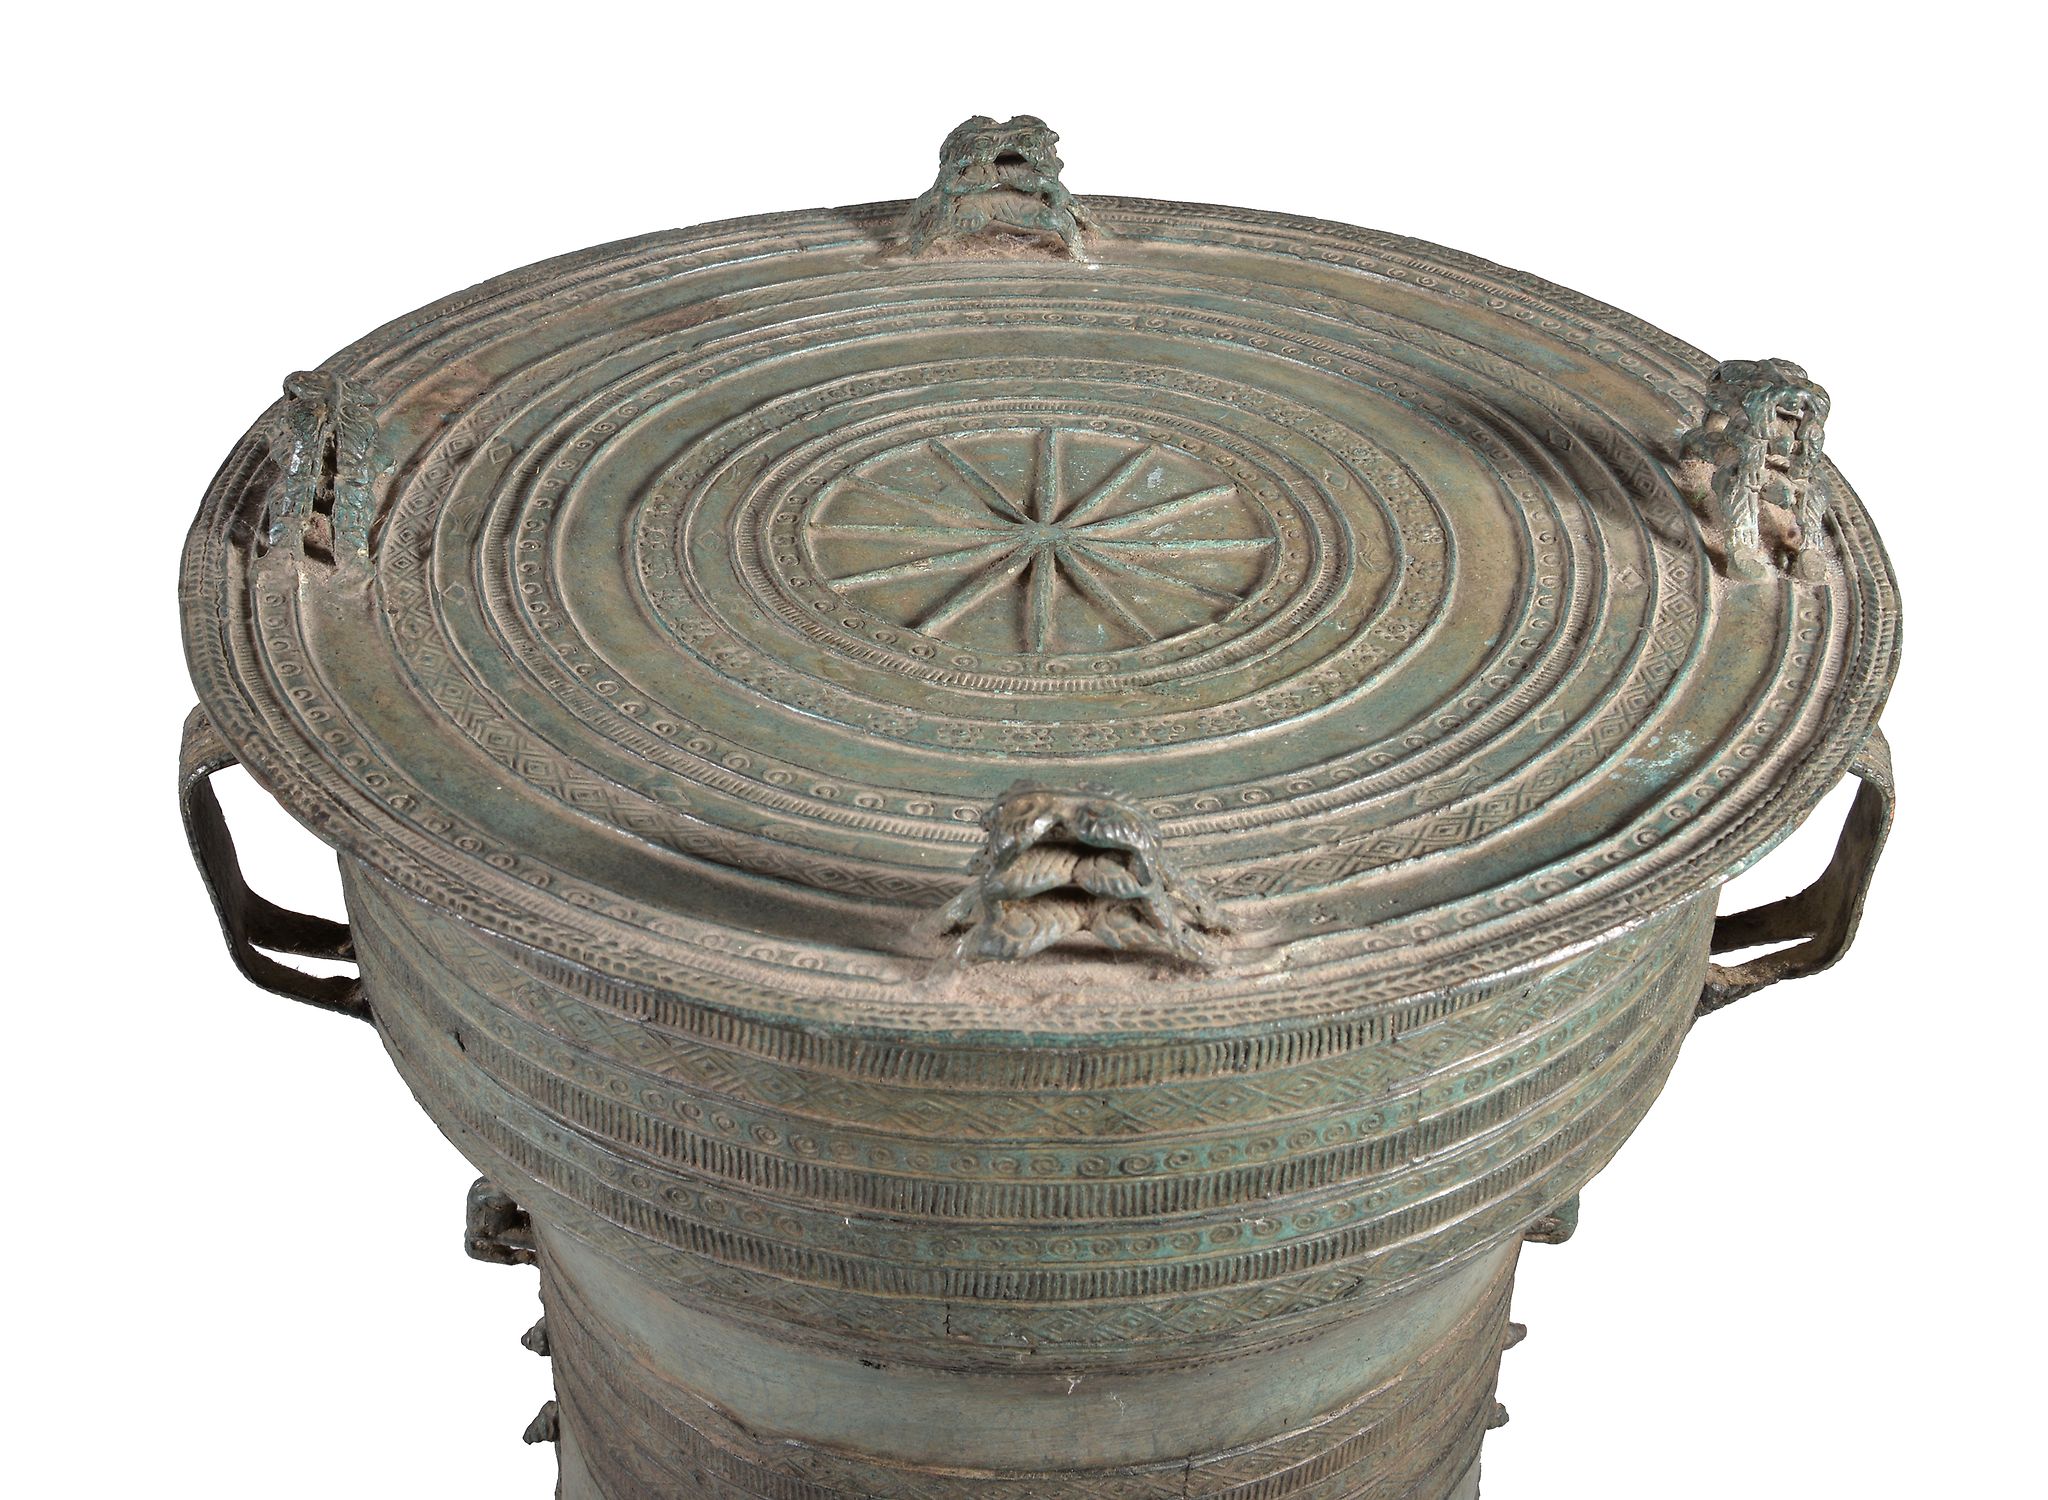 Two Burmese cast bronze 'rain drums', each of waisted cylindrical form with overlapping top and - Image 2 of 2